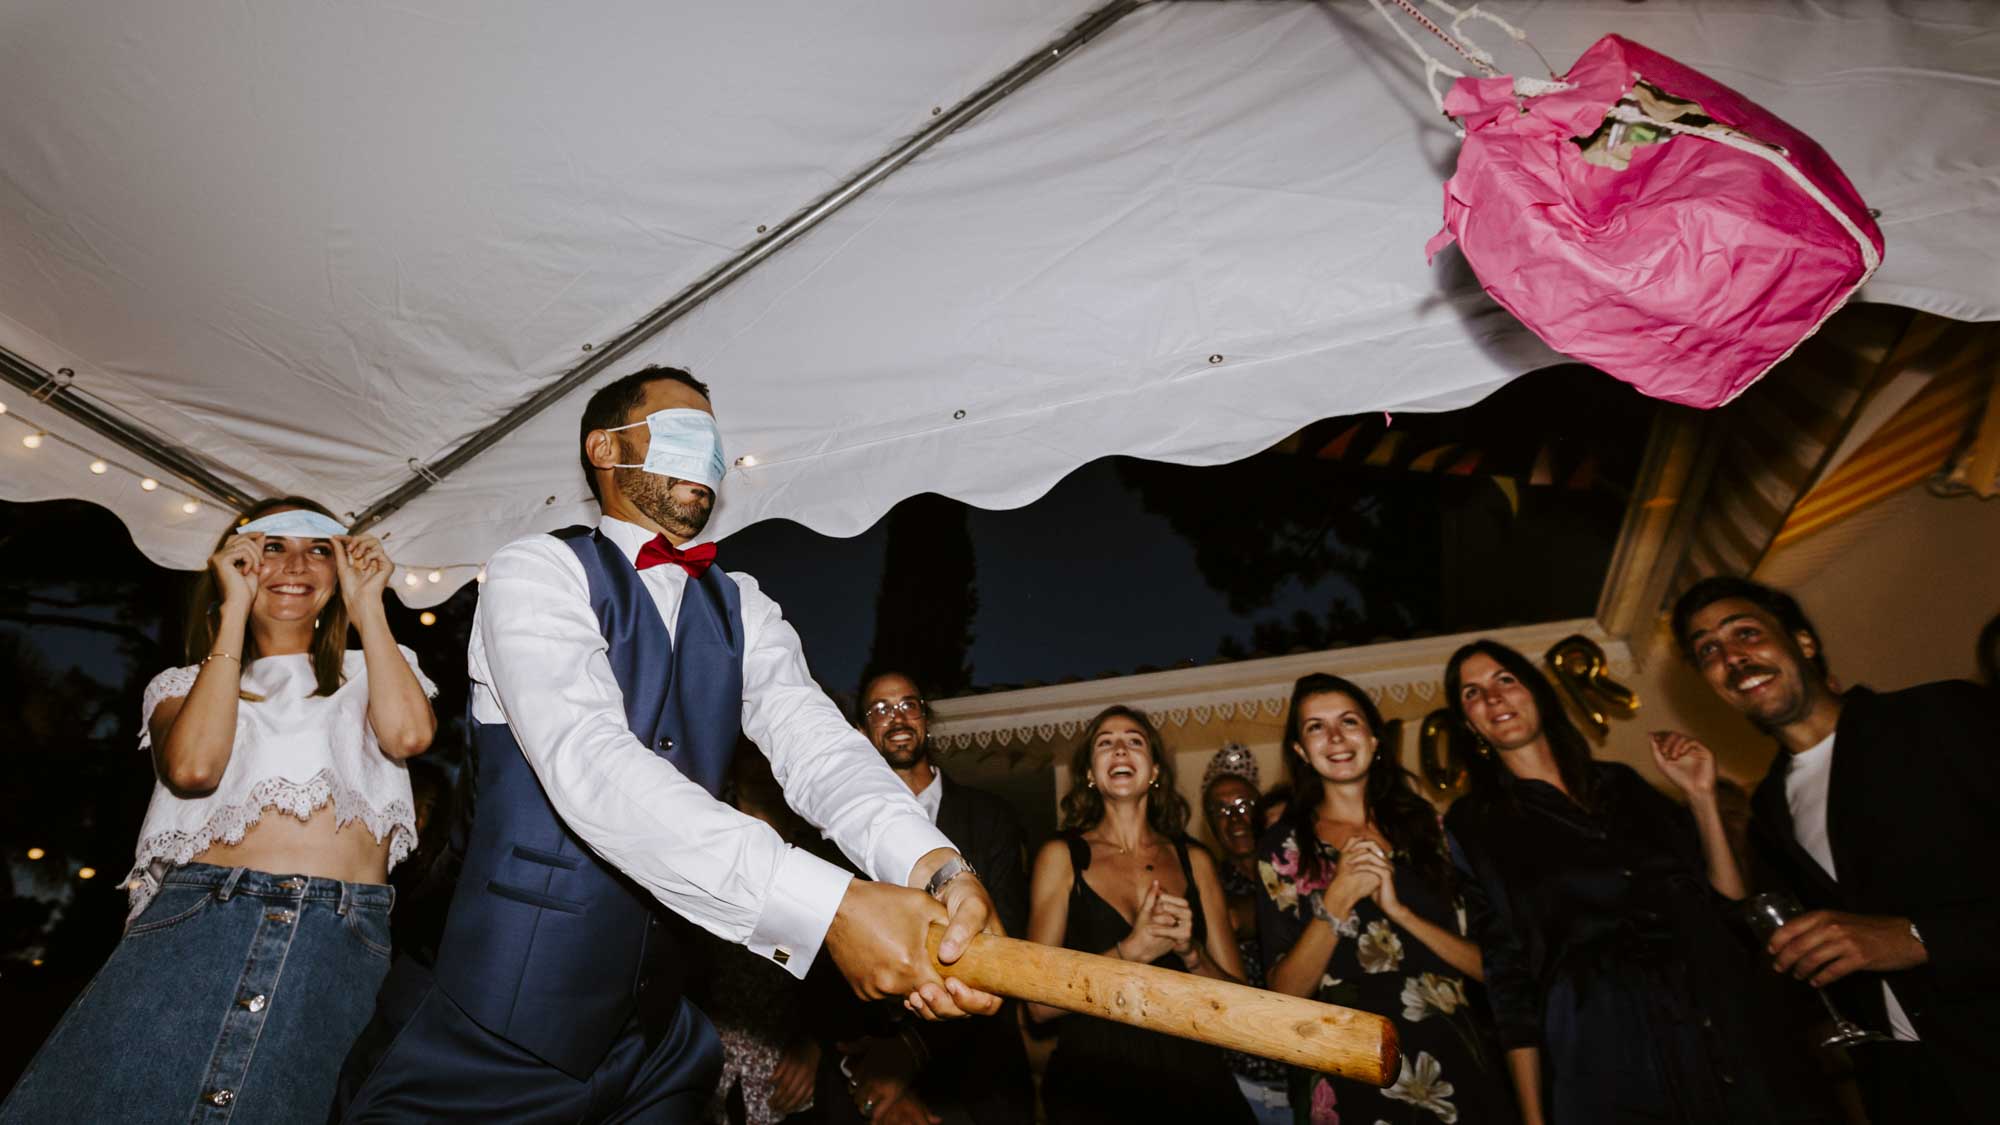 Bordeaux wedding photographer: the groom tries to hit the piñata with his eyes covered in a chirurgical mask